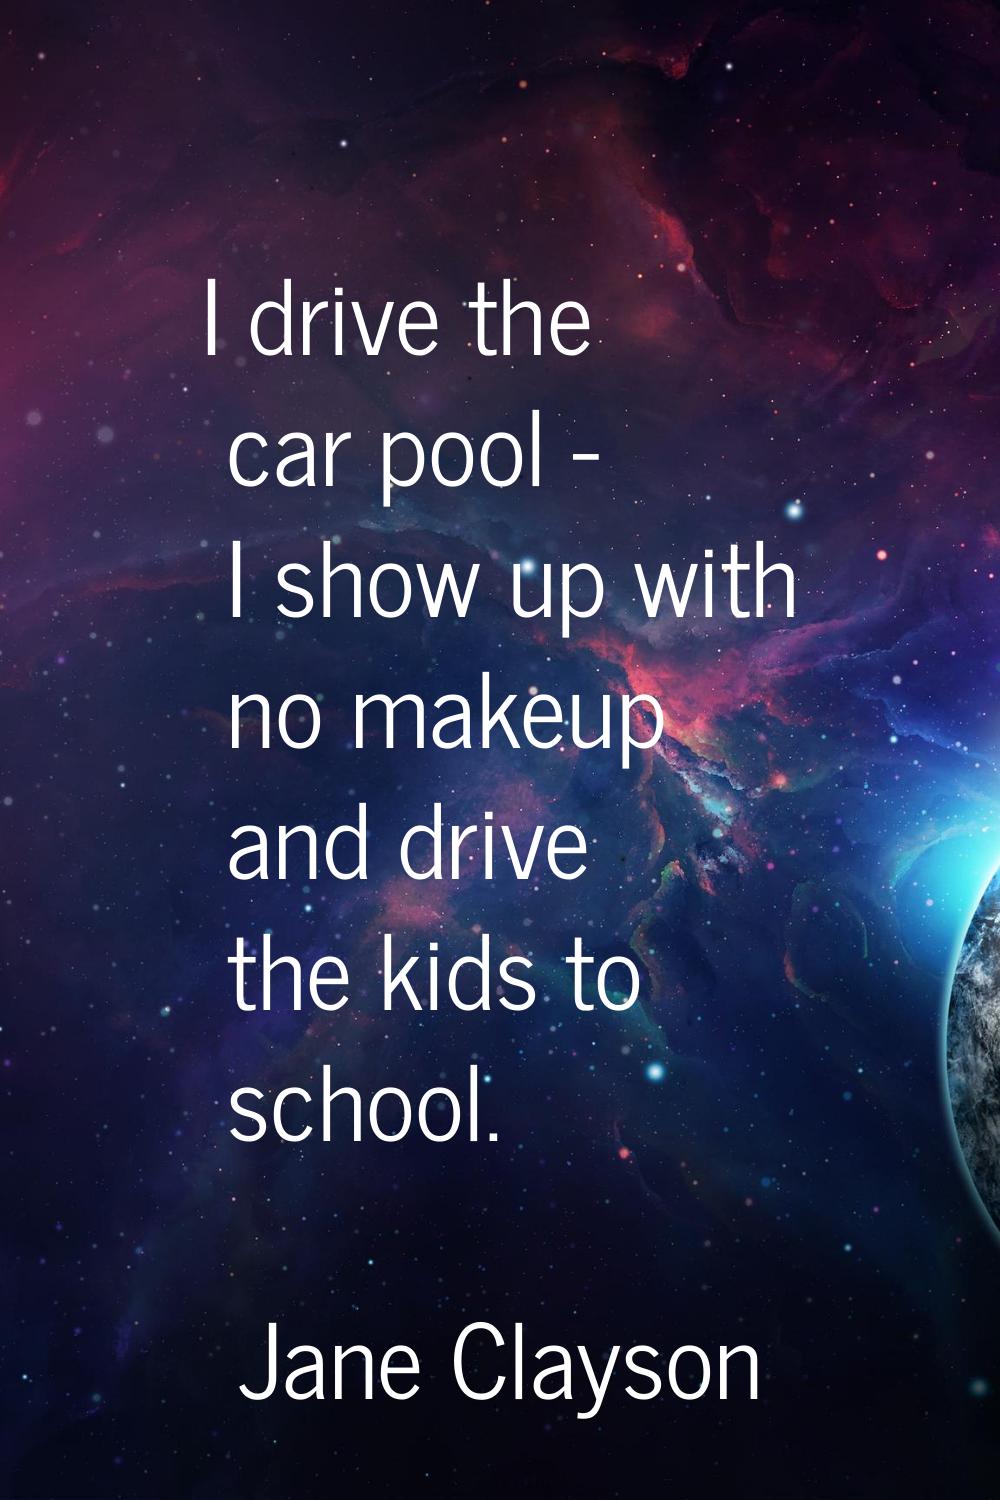 I drive the car pool - I show up with no makeup and drive the kids to school.